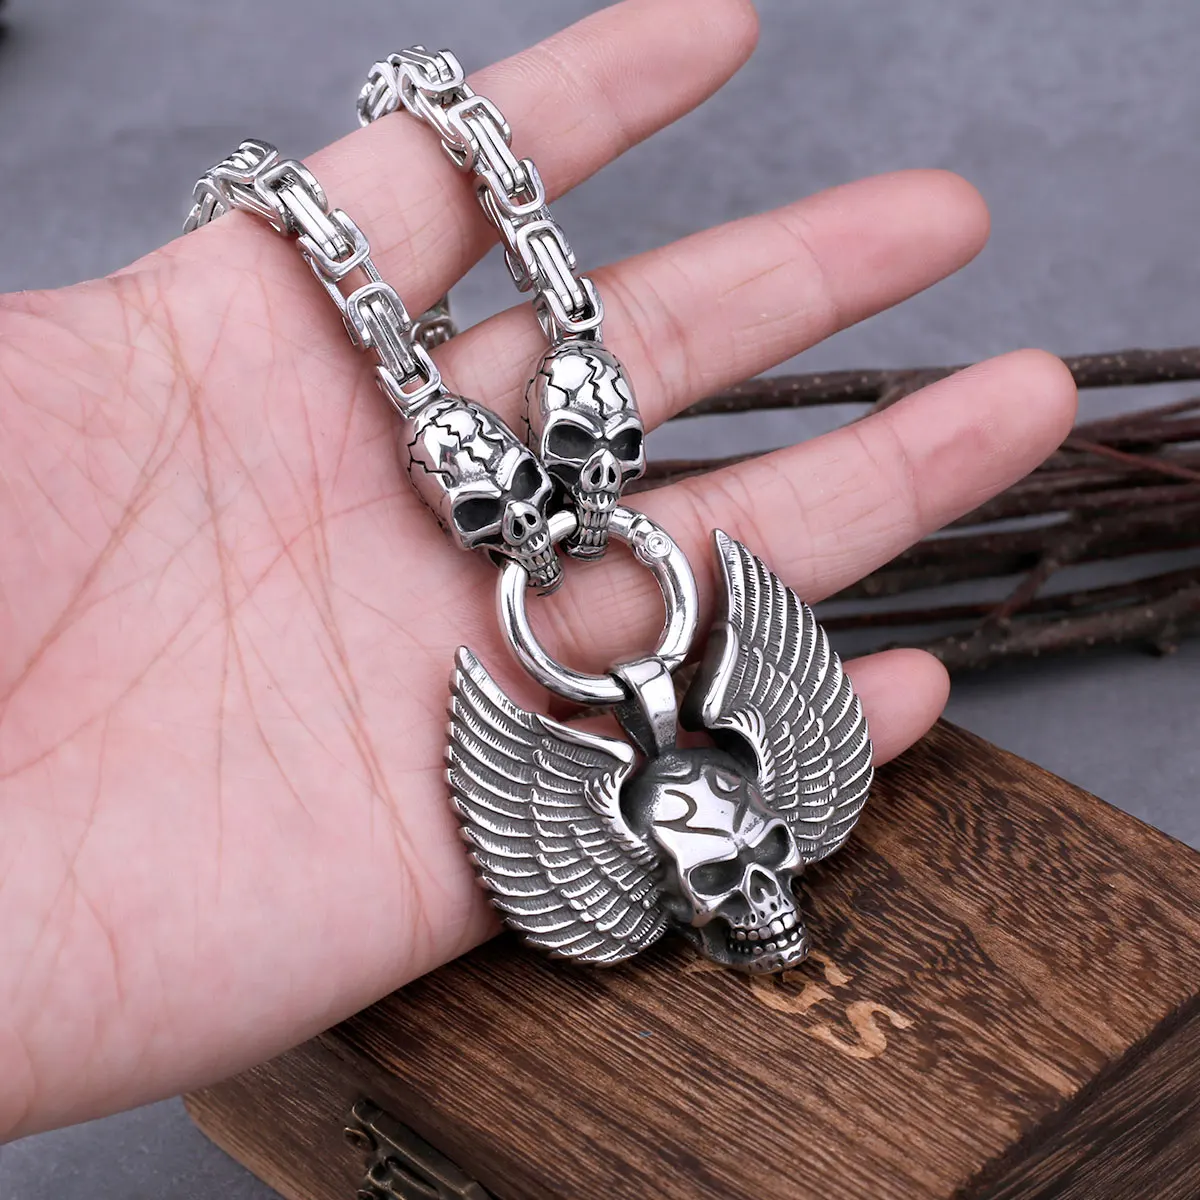 

Stainless Steel Wing Head Skull Pendant with Skull Square Necklace Men's Fashion Gothic Pendant Necklace Biker Hip Hop Jewelry